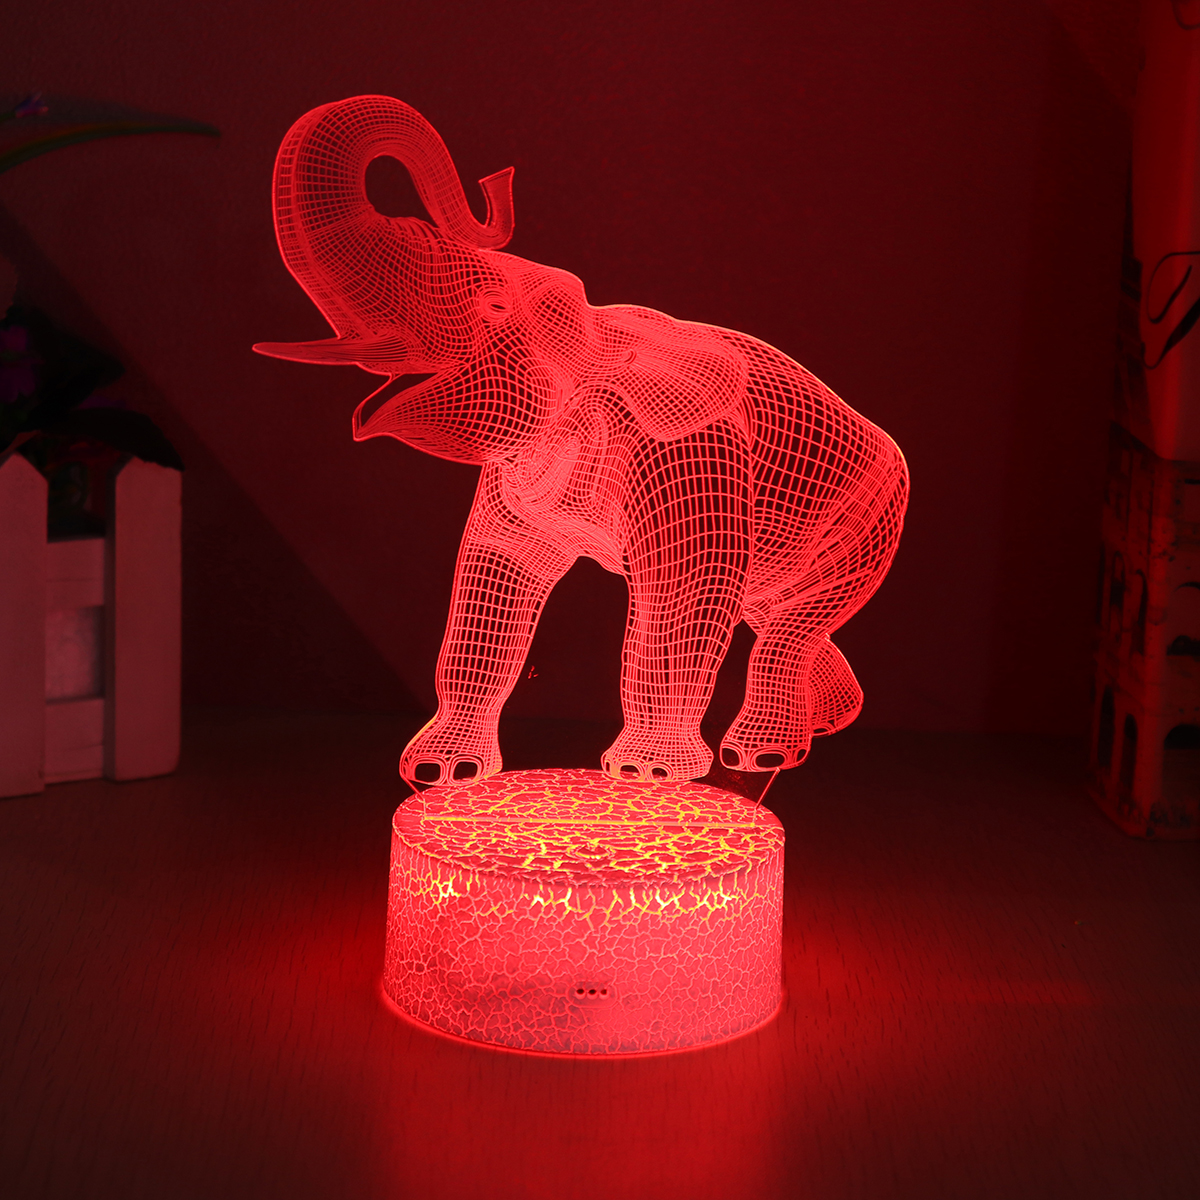 16-Colors-3D-LED-Night-Light-Touch-Switch-Elephant-Table-Bedroom-Lamp-Home-Decor-1370465-12